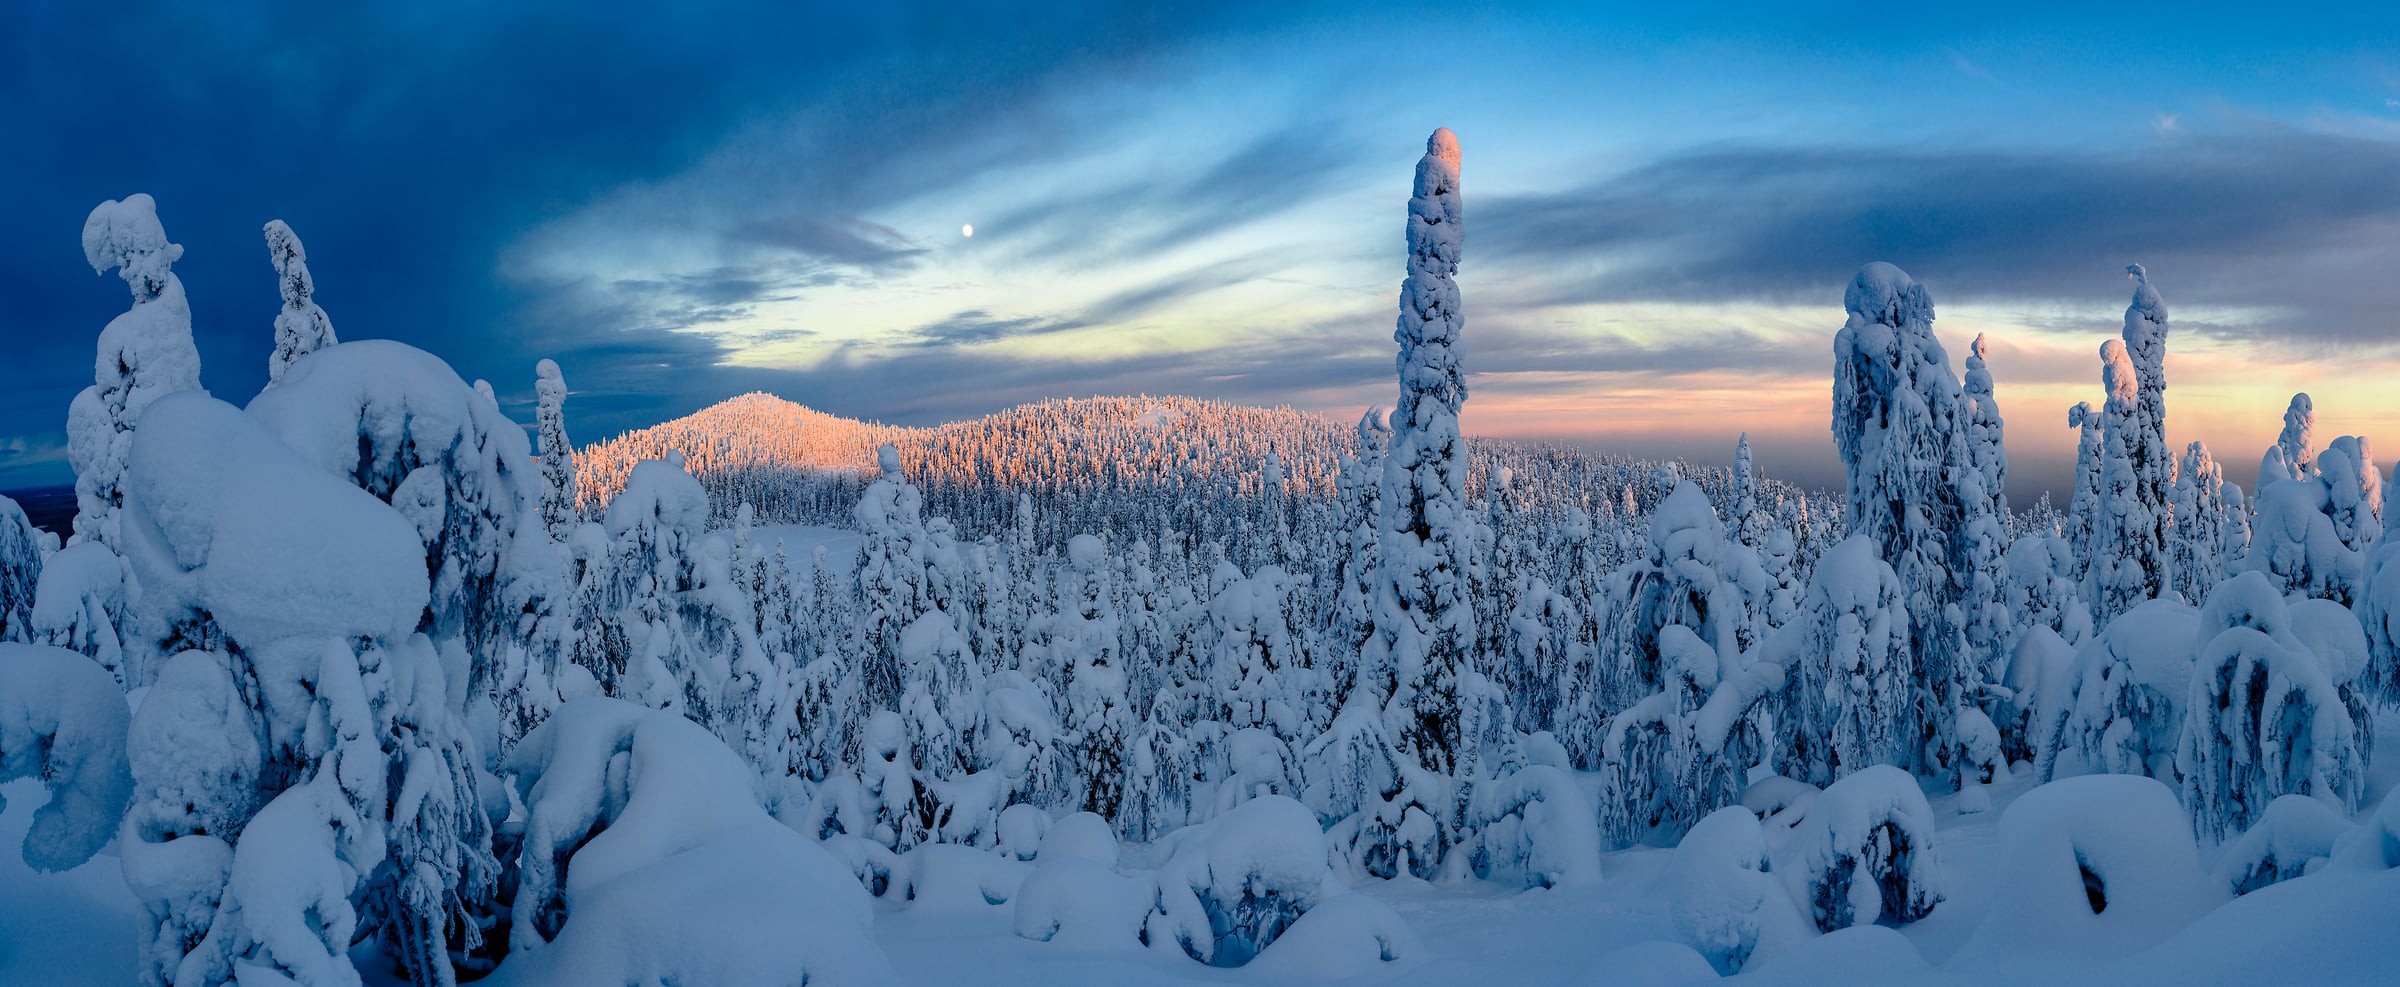 325 megapixels! A very high resolution, large-format VAST photo print of a winter scene with snow-covered trees and snowy hills at evening; landscape photograph created by Roberto Moiola in Ruka, Finland.